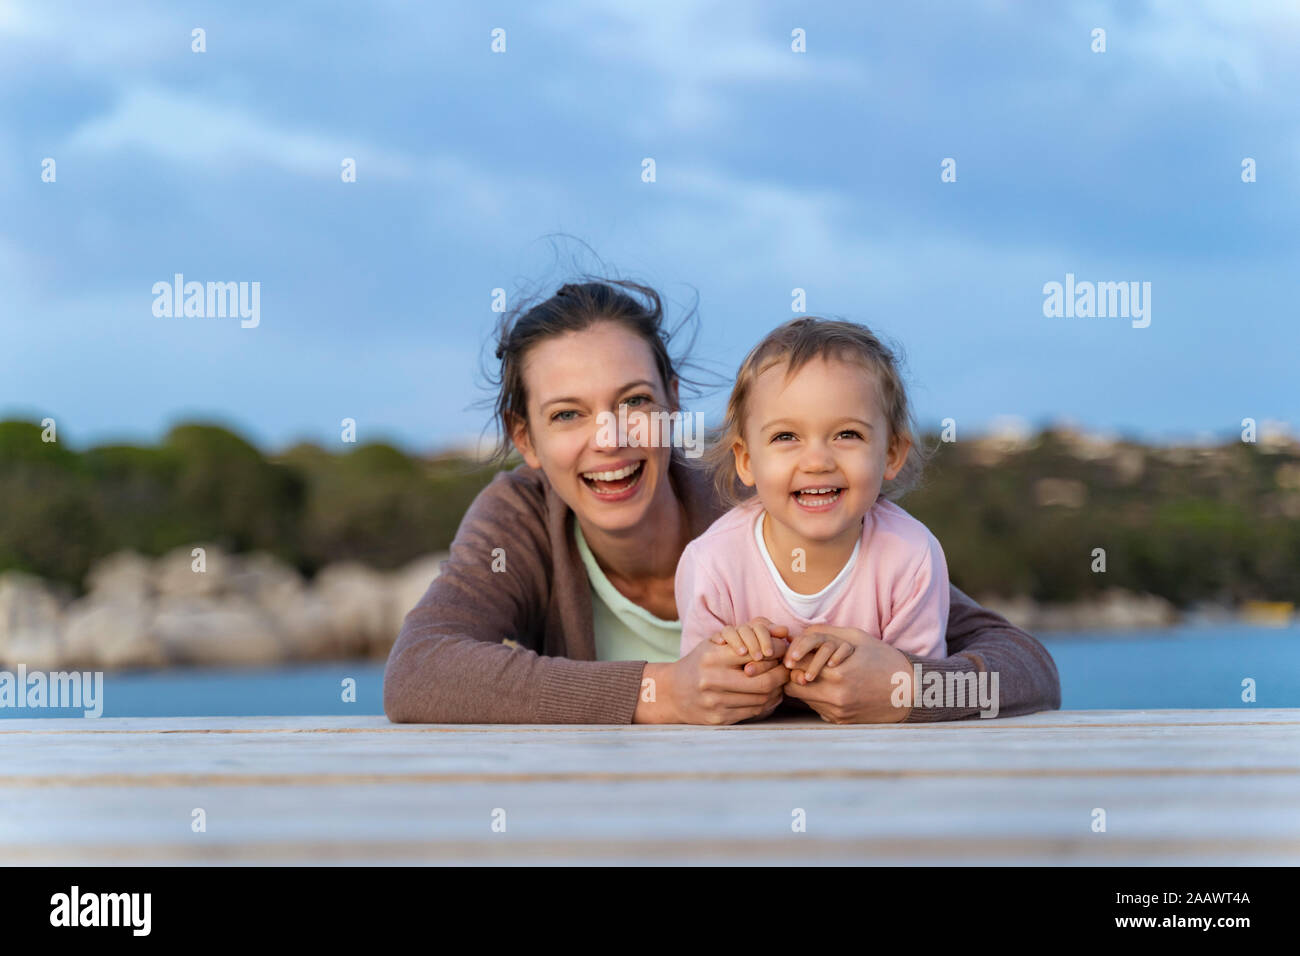 Portrait of happy mother and daughter lying on a jetty at sunset Stock Photo